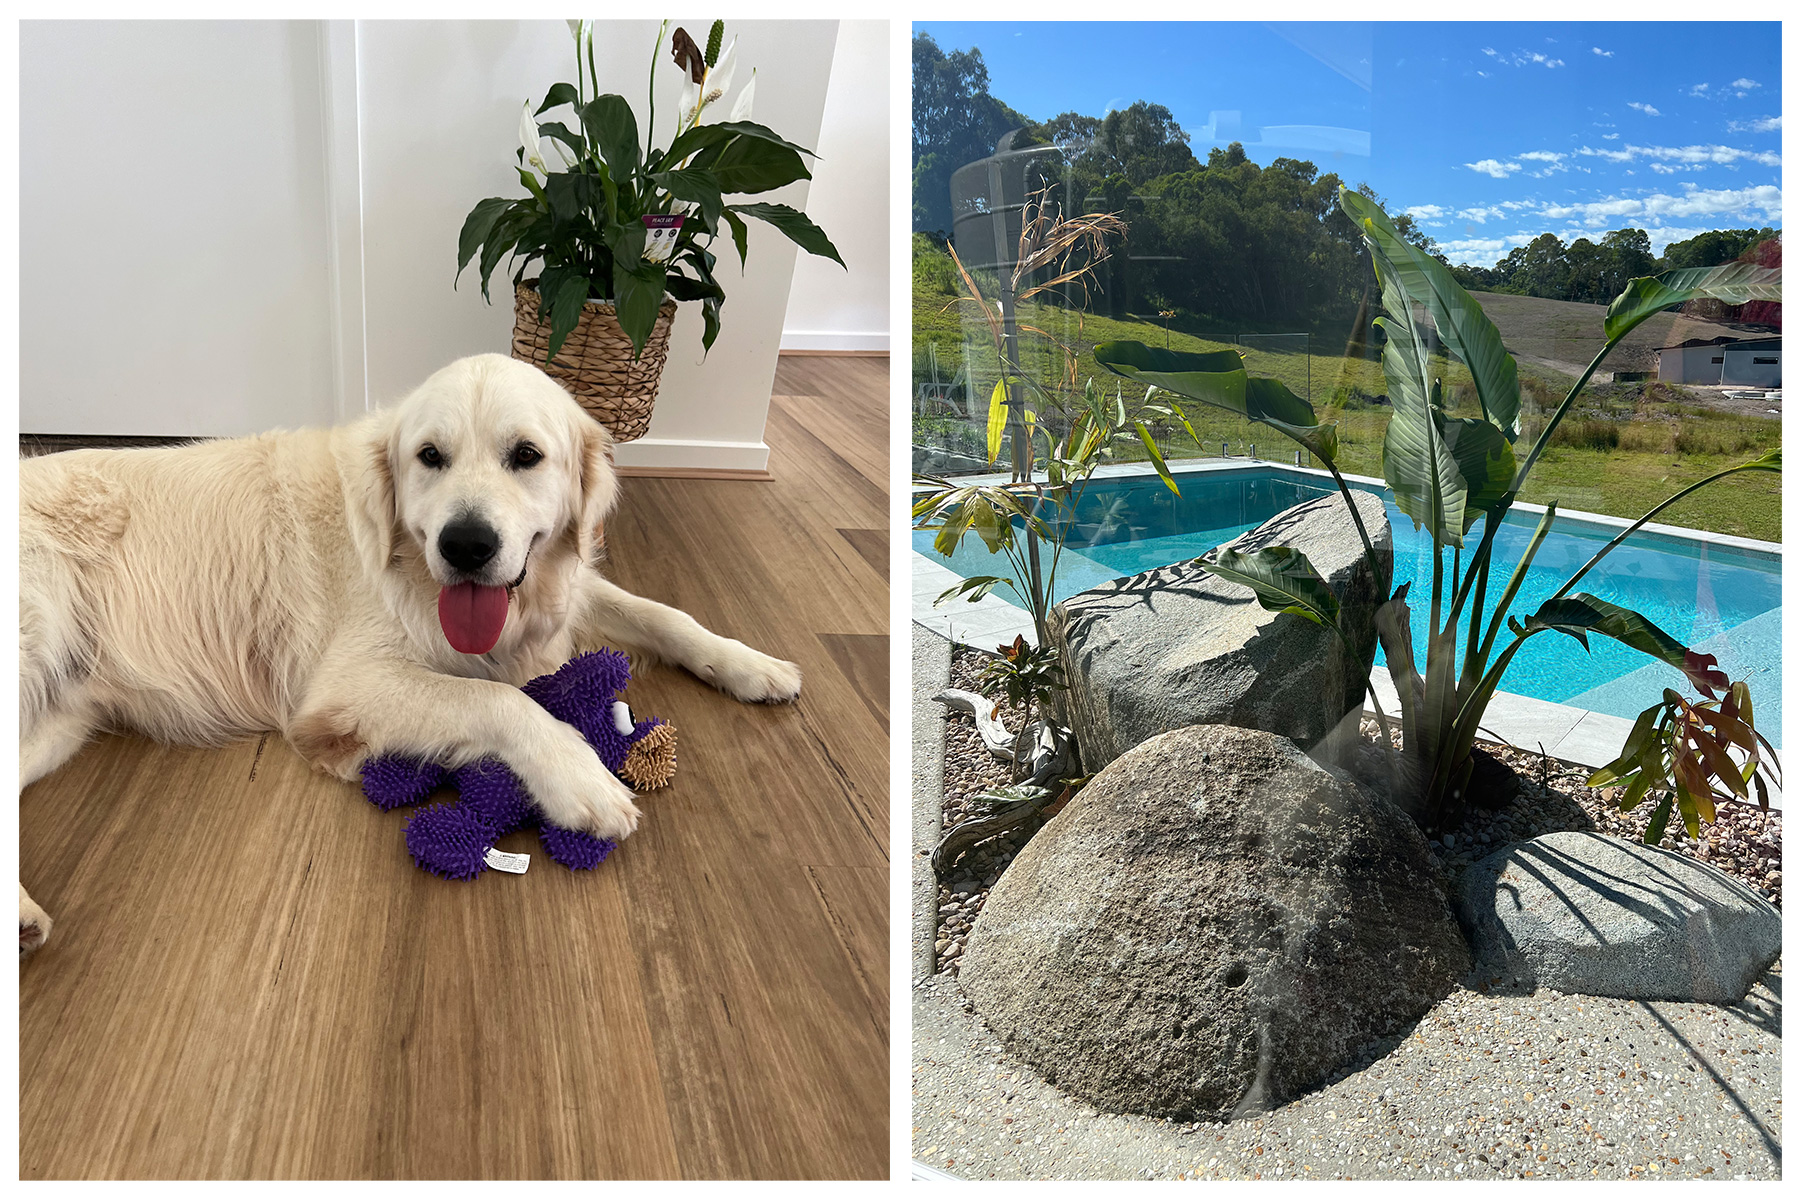 2 photos side by side, one of a labrador dog with a toy and the other of a pool with rocks and palm trees. 